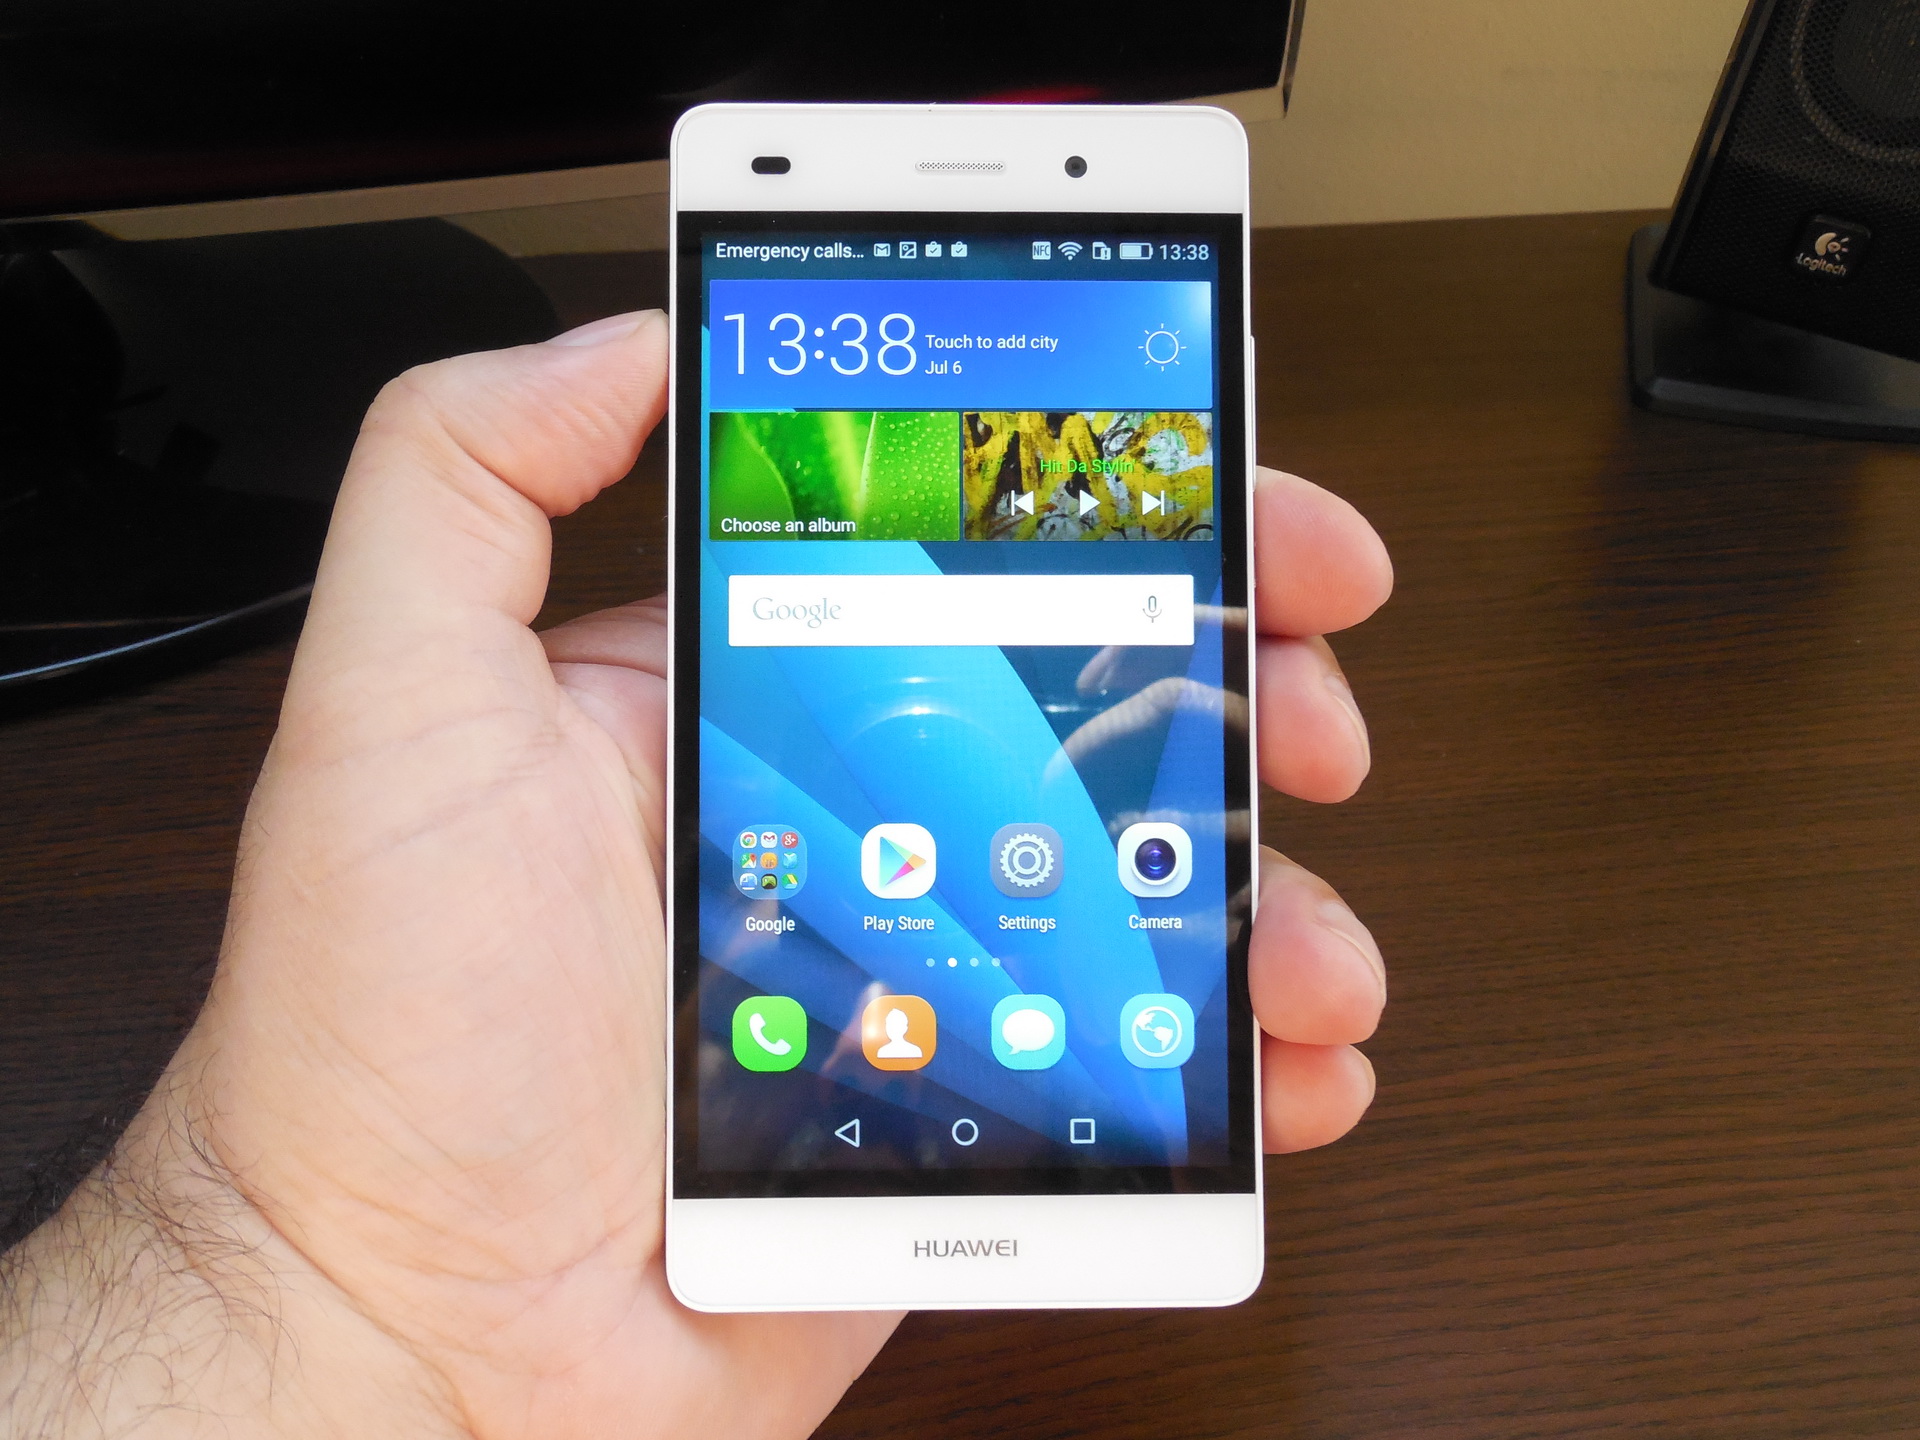 Huawei P8 Lite Review: Light and Affordable, an Optical Hit from Huawei (Video) | GSMDome.com